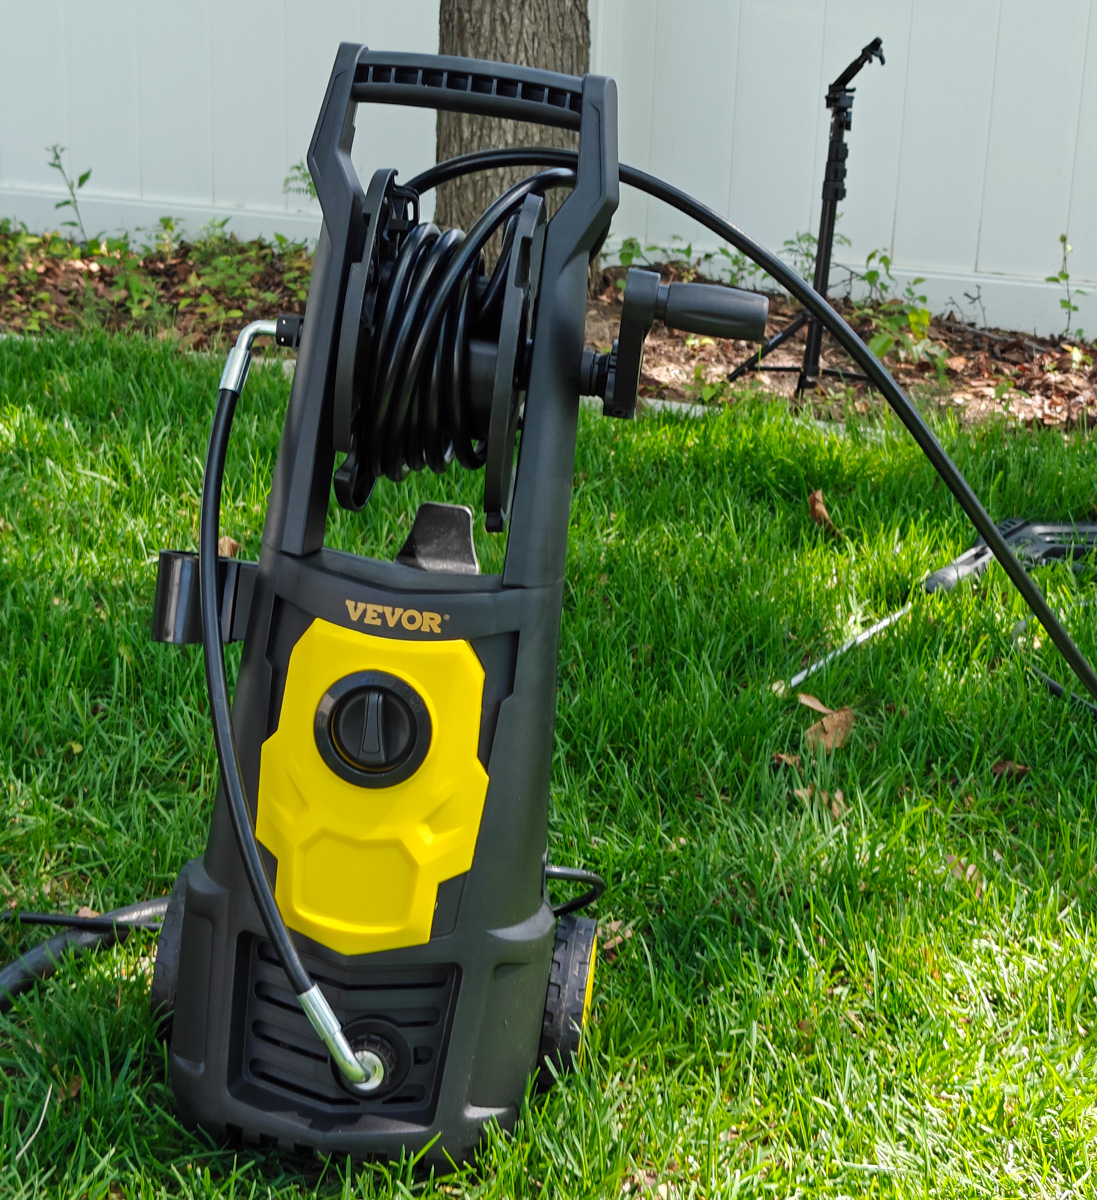 vevor electric power washer 16